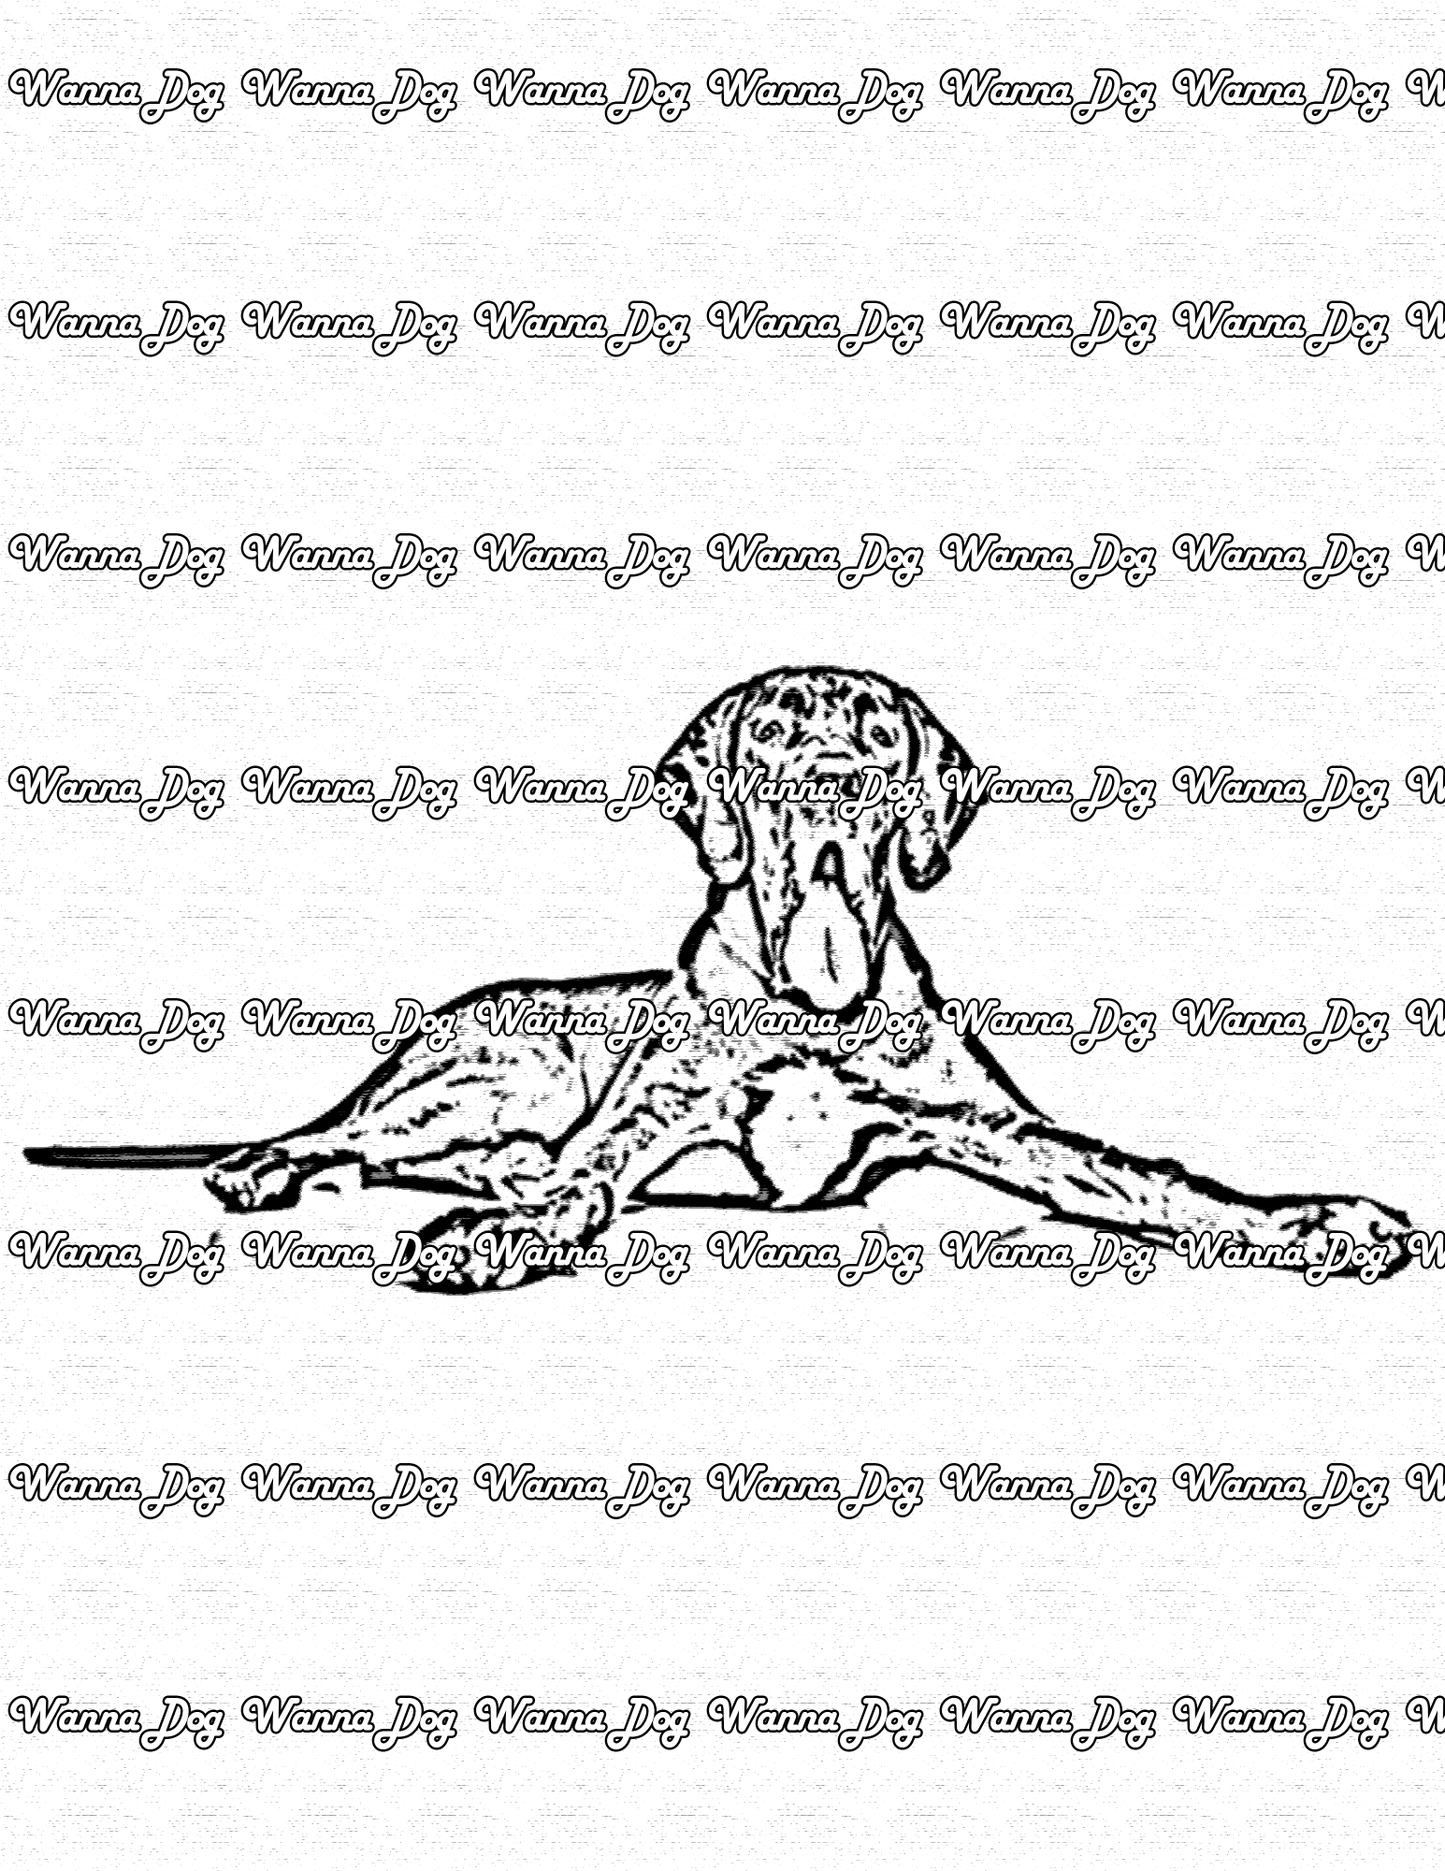 Great Dane Coloring Page of a Great Dane posing for the camera with laying down